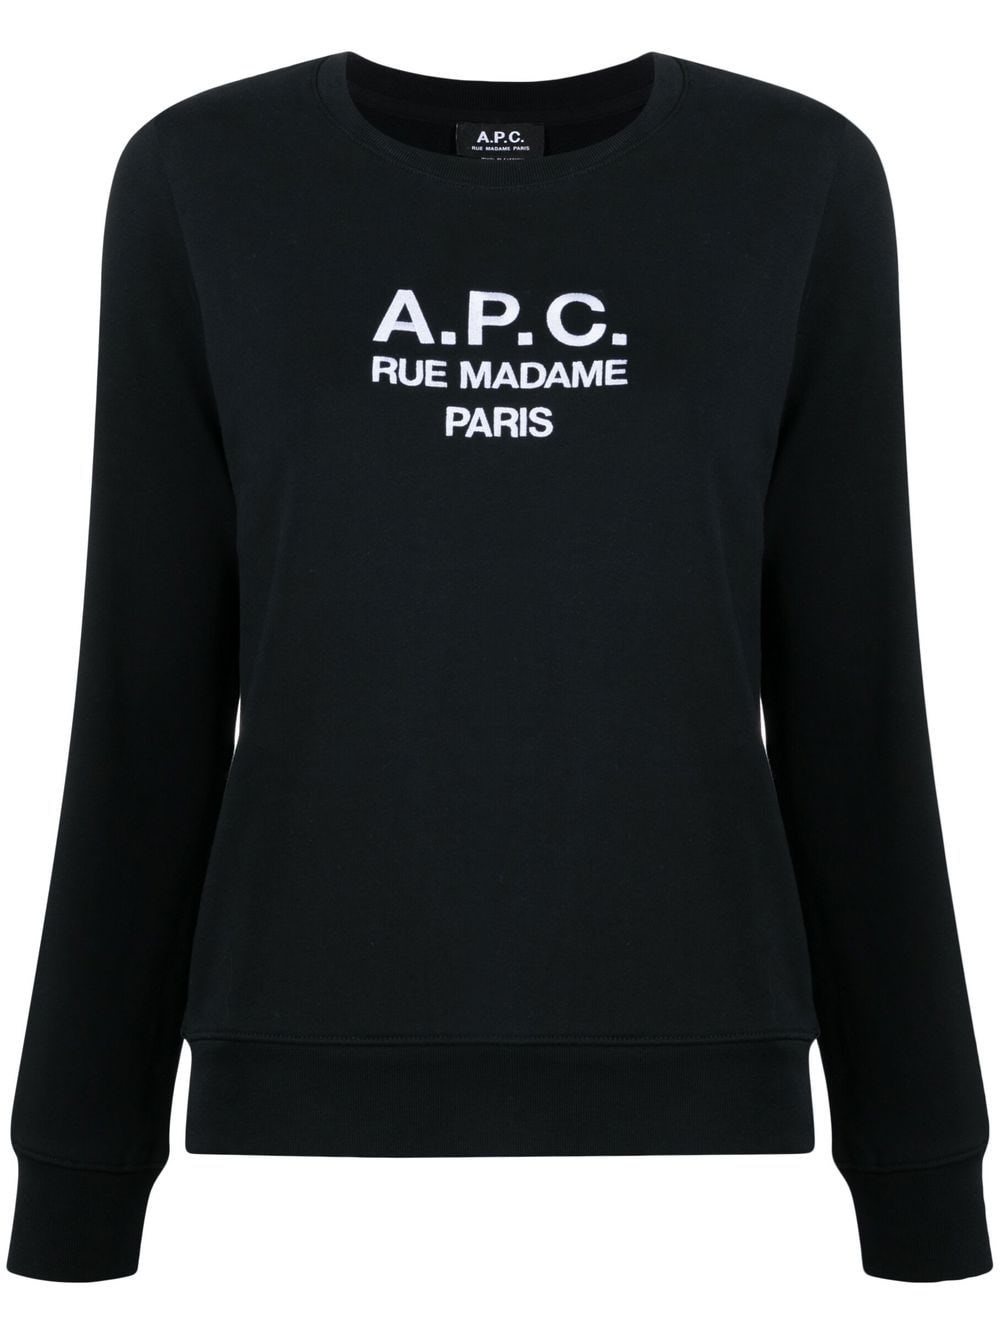 a.p.c. TINA SWEATER available on montiboutique.com - 56089